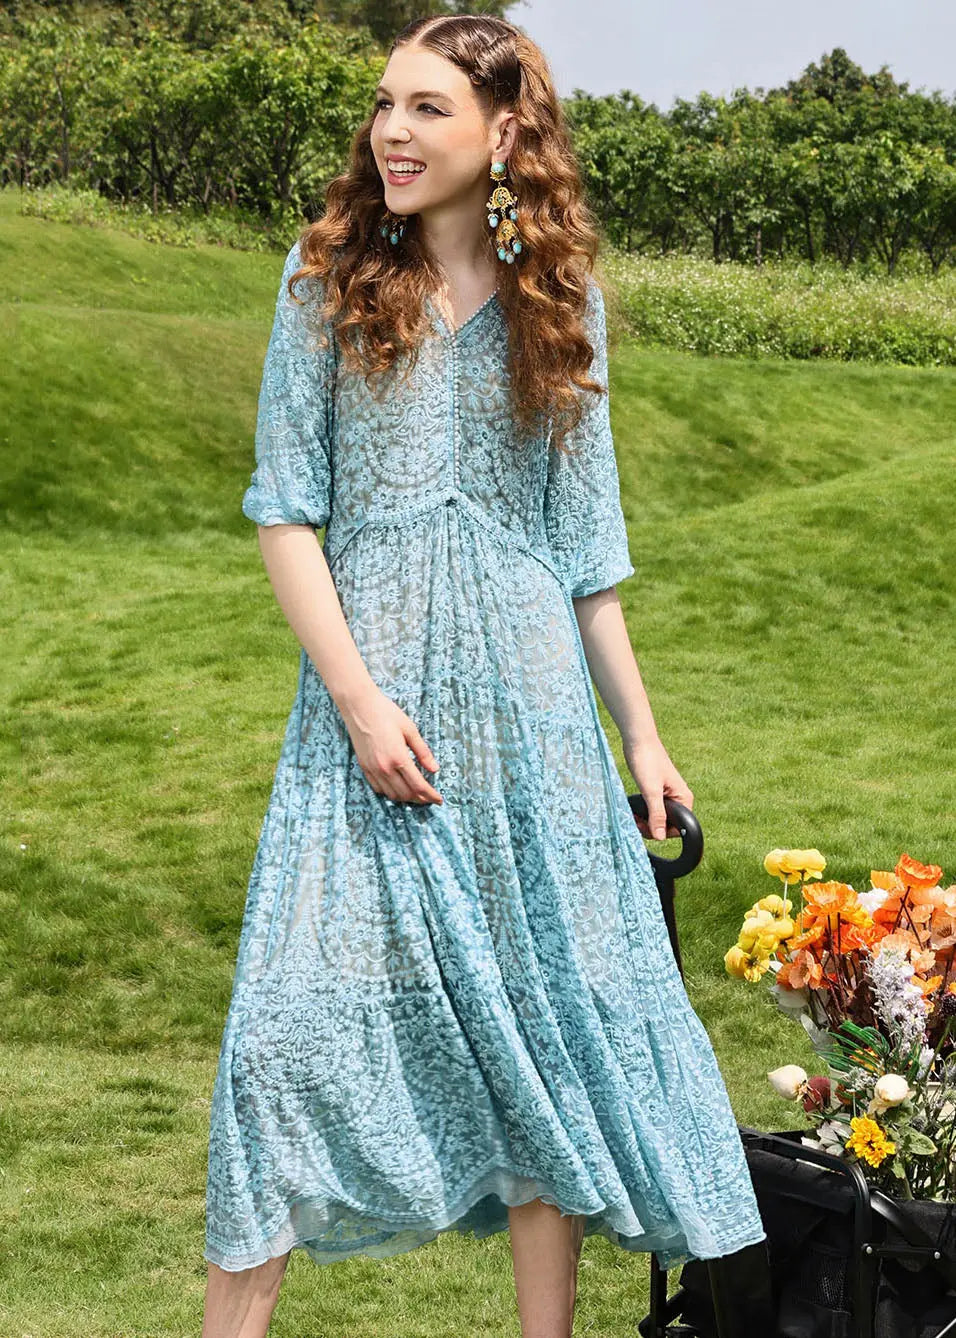 Brief Sky Blue Embroidered Floral Hollow Out Silk Long Dresses Half Sleeve Ada Fashion